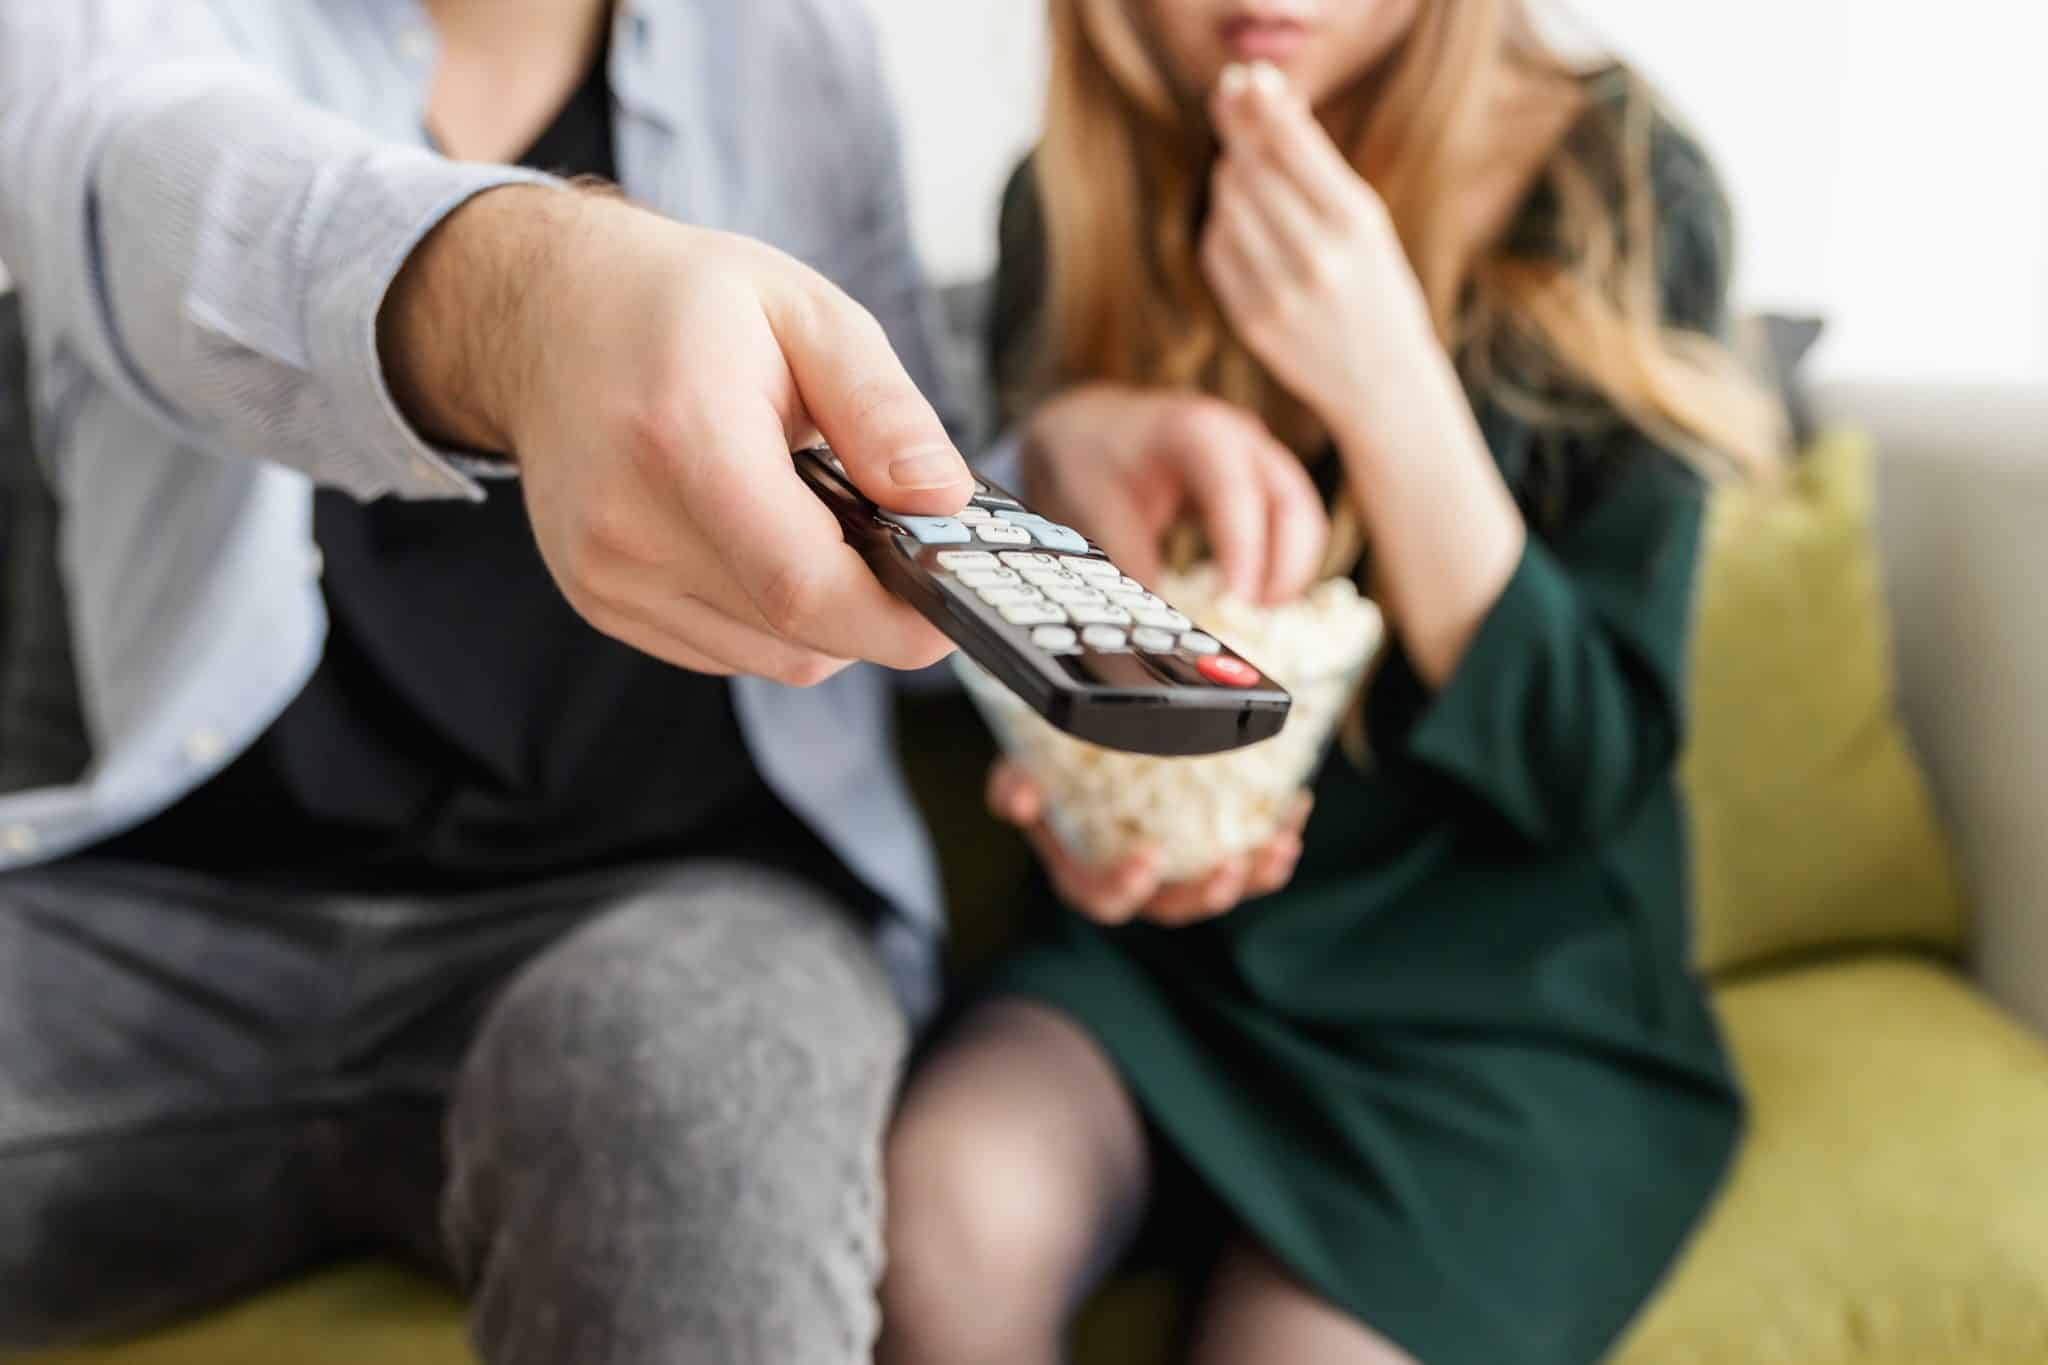 Couple using the remote control to change the audio description setting on their television